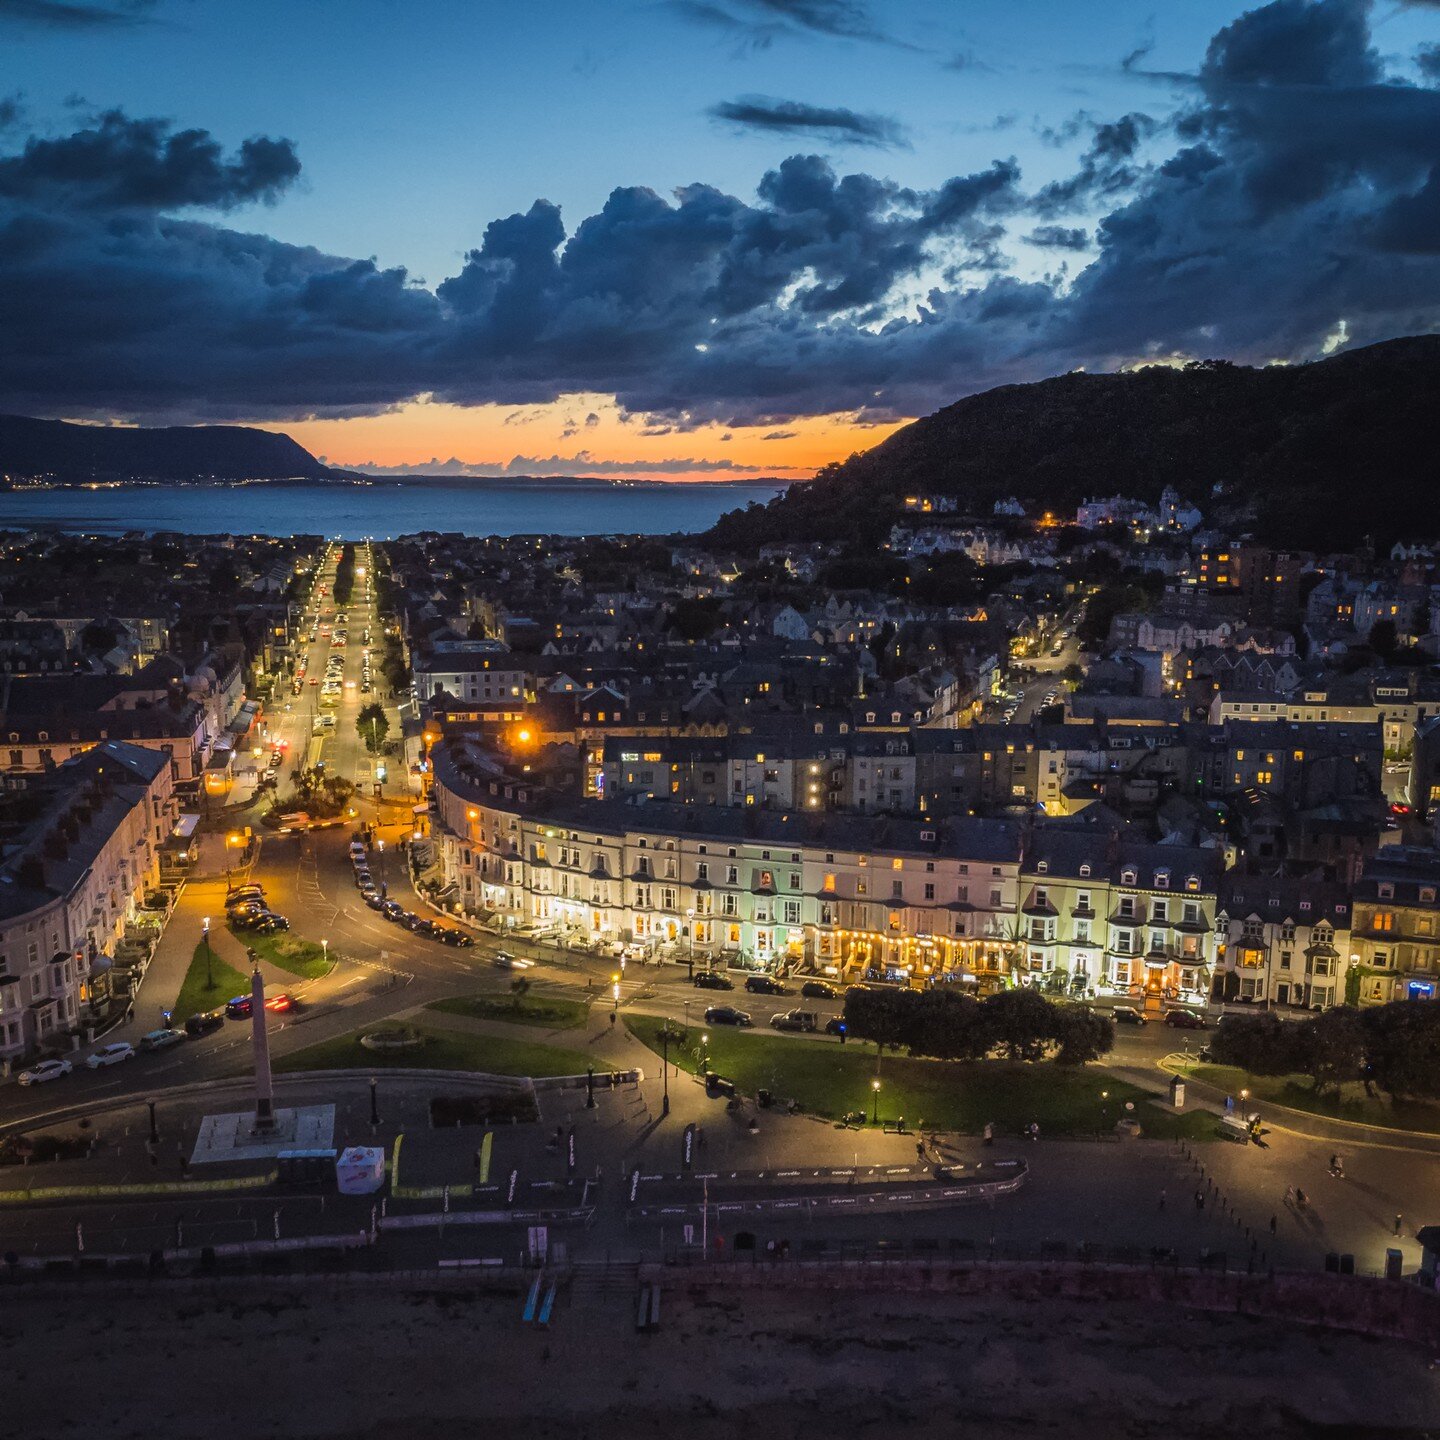 A very busy Llandudno this evening, just after sunset. Looking straight down Gloddaeth Avenue from the north shore to the west shore.
-
-
-
-
-
-
-
-
#llandudno 
#llandudnobeach 
#northwales
#northwalestagram 
#northwalesinstagram 
#northwalescoast 
